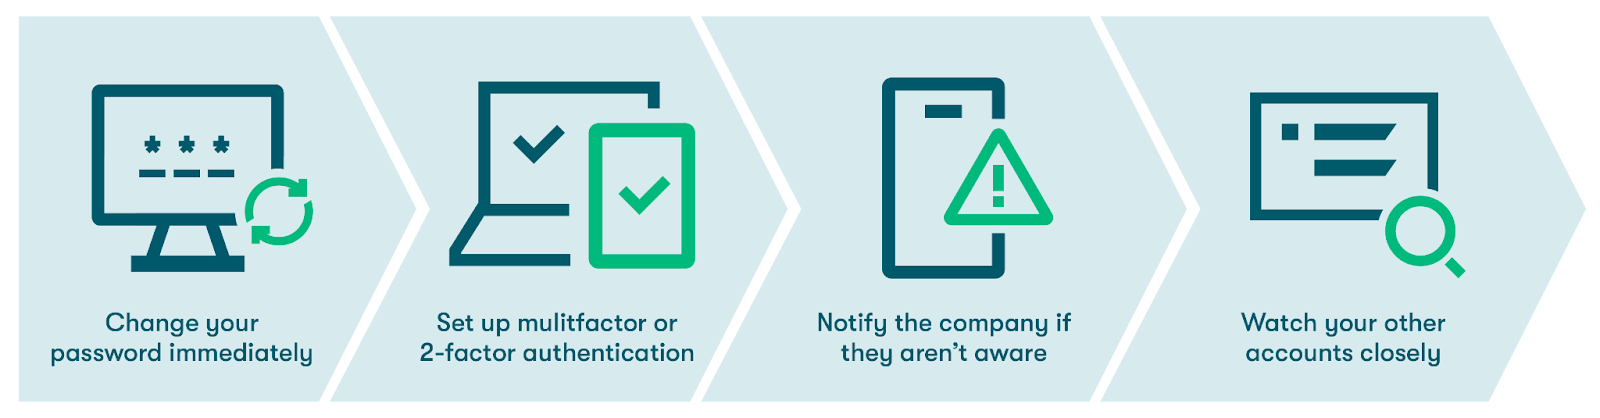 Graphic of 4 icons representing the recommended actions one should take upon discovering that your password has been hacked.